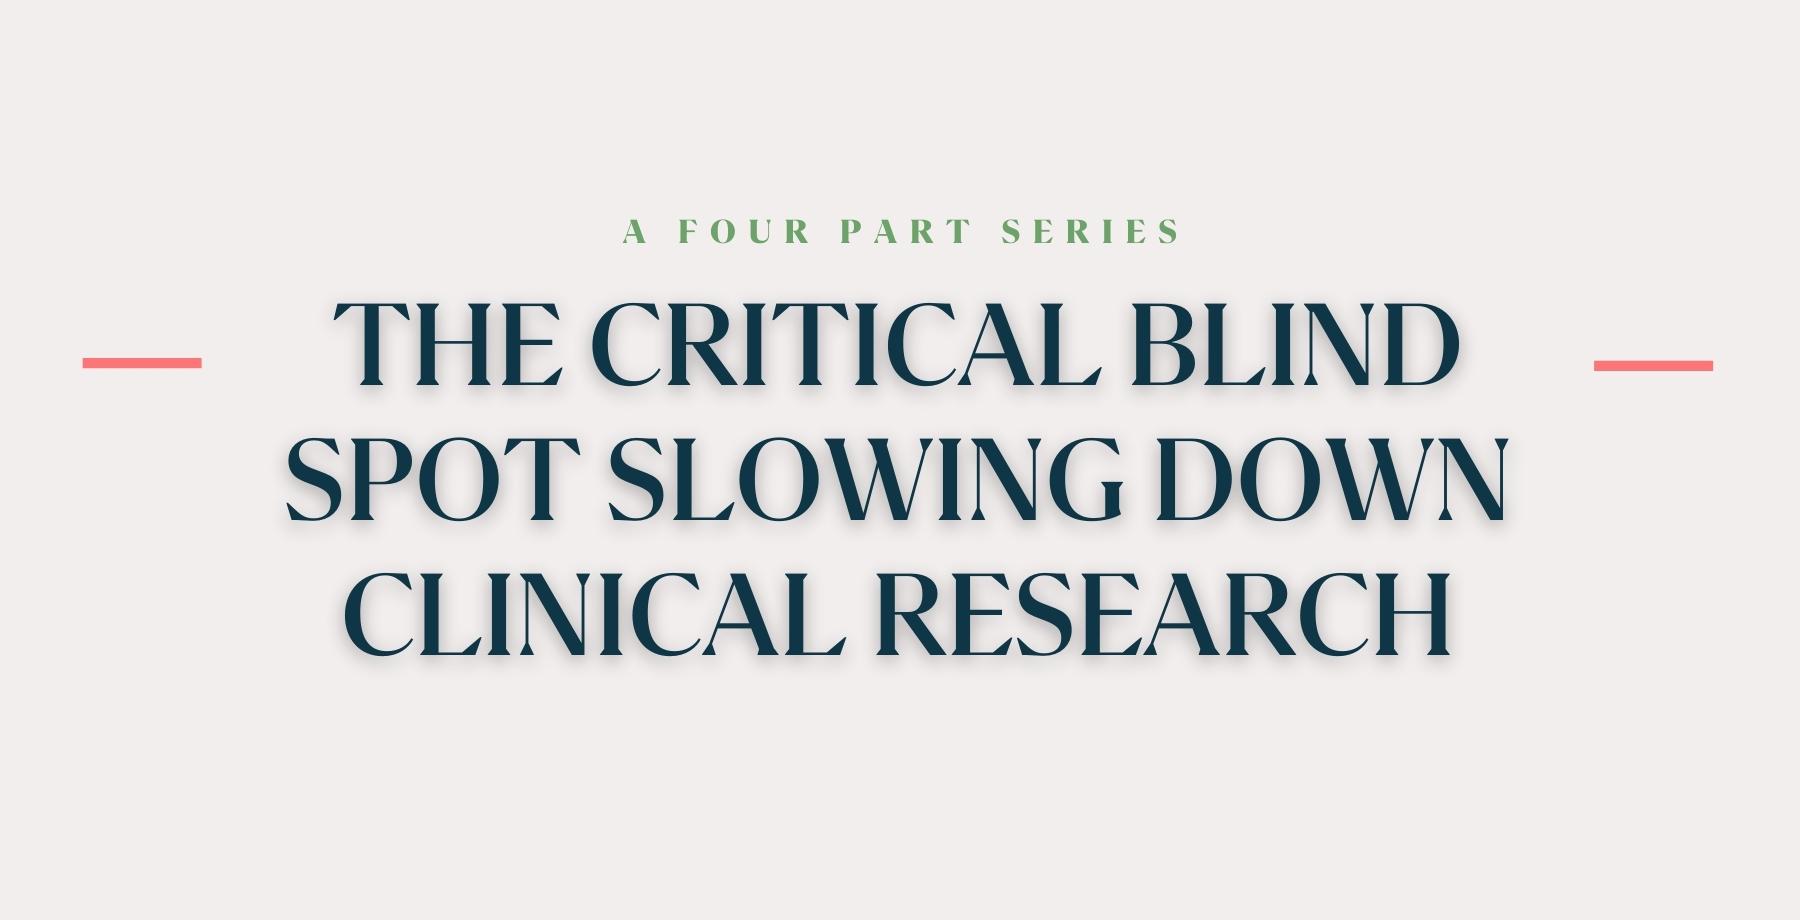 The_Critical_Blind_Spot_Slowing_Down_Clinical_Research